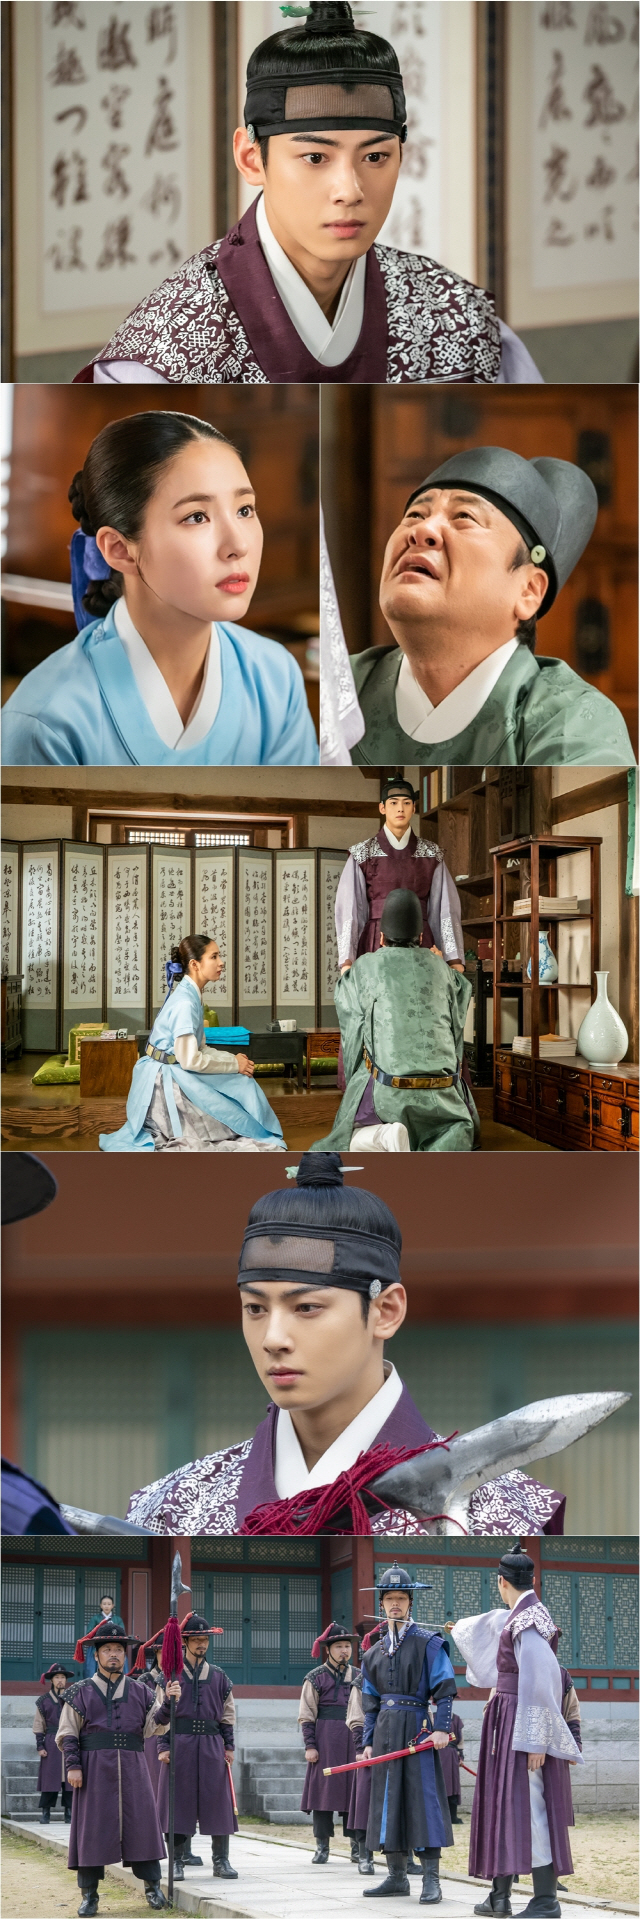 The new officer Na Hae-ryung Cha Eun-woo rushes toward the truth 20 years ago.He not only ignores the dismantling of Shin Se-kyung and the Holy Land, but also shows a charismatic army, such as suppressing the gold army that blocks the front.Na Hae-ryung, starring Shin Se-kyung, Cha Eun-woo, and Park Ki-woong, is the first problematic woman (Shin Se-kyung) of Joseon and the fill full romance of Prince Lee Rim, the anti-war mother solo.Lee Ji-hoon, Park Ji-hyun, and Kim Yeo-jin, Kim Min-sang, Choi Duk-moon, and Sung Ji-ru.In the 33-36th episode of Na Hae-ryung, a new employee, Lee Rim was shown to be the enemy of Lee Kyeom (Yoon Jong-hoon) of Heeyoung County, the former president of the U.S.It was also surprising that Lee was a teacher in the Hodam Teachers Exhibition, which is the center of all events.Na Hae-ryung and Irim discovered the link between Kim Il-moks Sacho and Nokseodang, which contain all the truths of the incident 20 years ago, and approached the truth and raised interest in future development.Na Hae-ryung in the public photo is looking at the Leerim of a firm eye.This is the situation where Lee Lim decided to visit Kim Yeo-jin and ask for the truth.In this regard, Heo Sam-bo (Seong Ji-ru) of the inner circle holds I-rims leg and begs begging him not to go to the preparations, while I-rim is turning away from him, which makes him sad.Then, while Na Hae-ryung and Sambo were heading for the preparations, Irim was restrained by the gold army.Soon, Irim is aiming at the gold soldiers who stop him, and he is shooting charisma that can not be tolerated, amplifying the tension.As such, Lee Lim is foreseeing that he will run into the past 20 years ago as the enemy of the King Hee Young-gun, and the truth will be revealed and what kind of blue will happen.Irim will visit Lim in preparation for the dissuade of Na Hae-ryung and Sambo, said the new employee, and I would like to ask for your attention until the end to what kind of conversation Irim will have with Lim, the only relative, and how this will affect the ending.Shin Se-kyung, Cha Eun-woo, and Park Ki-woong will appear in the new Na Hae-ryung broadcast at 8:55 p.m., 37-38 p.m. today (25th).